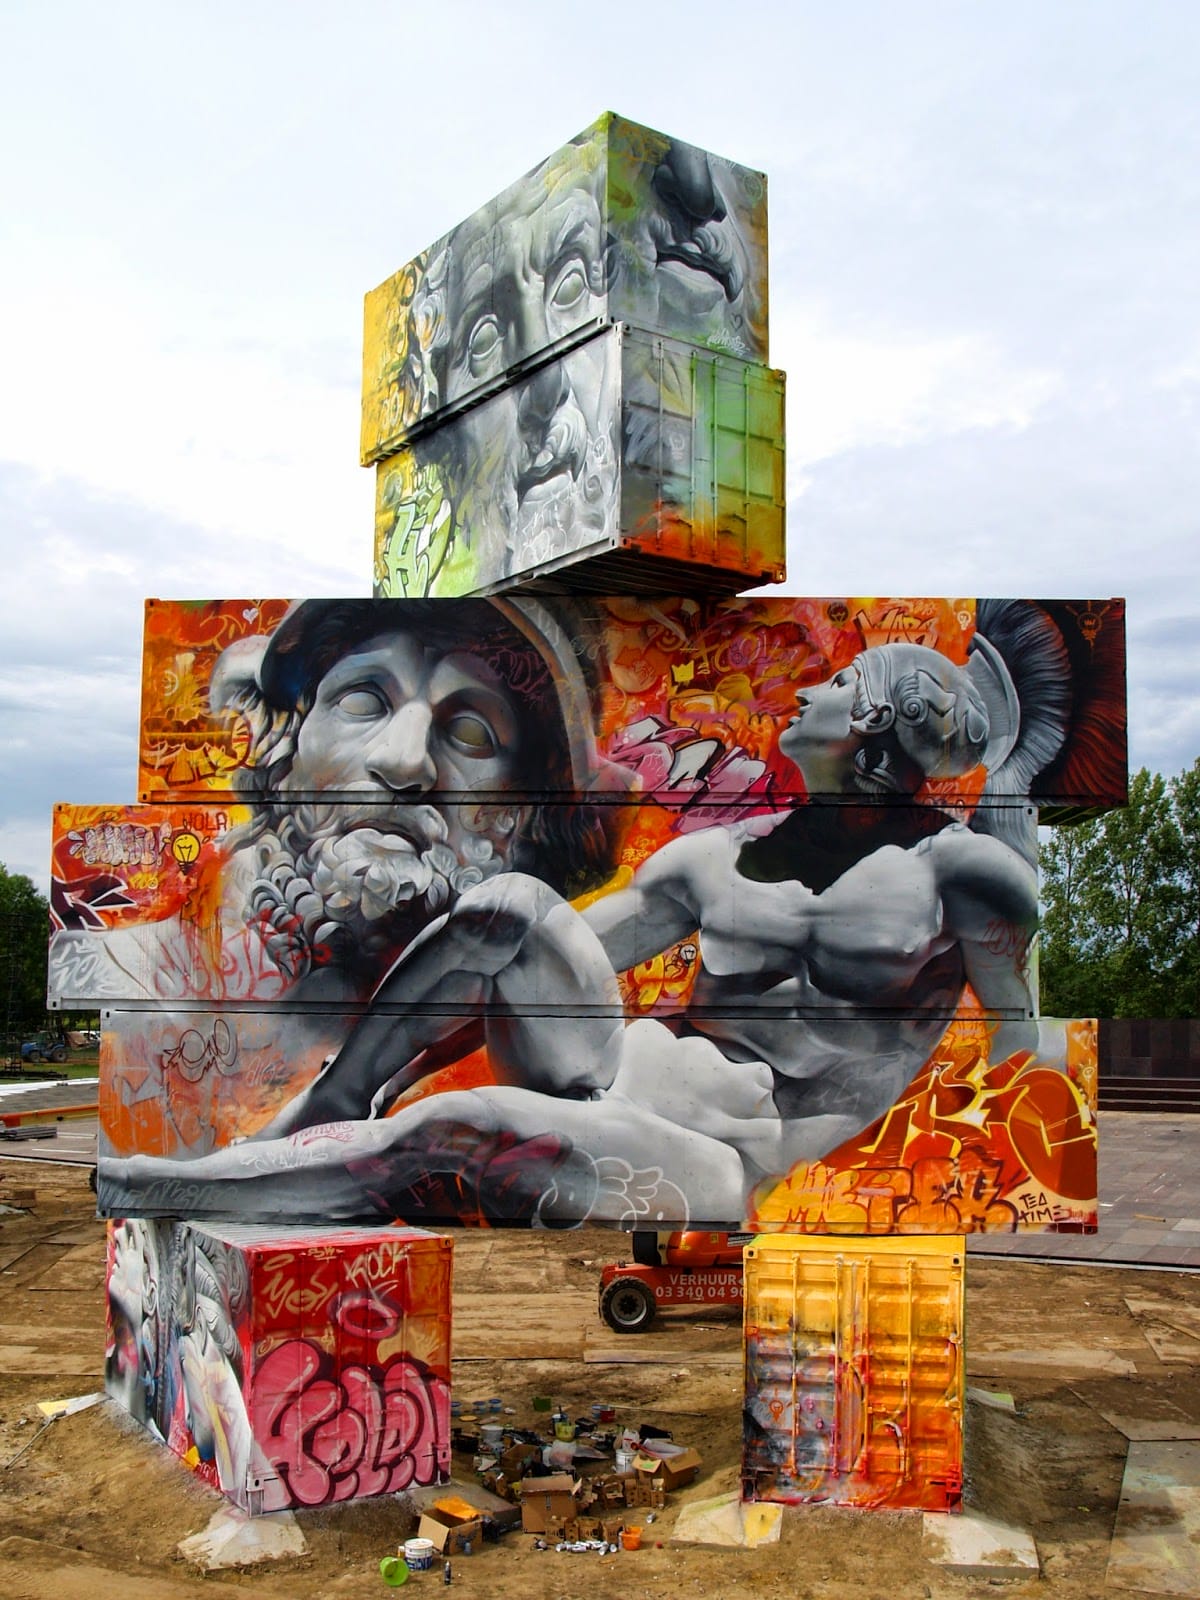 Impressive Monumental Murals That Blend Classical Figures And Graffiti By Pichiavo (17)